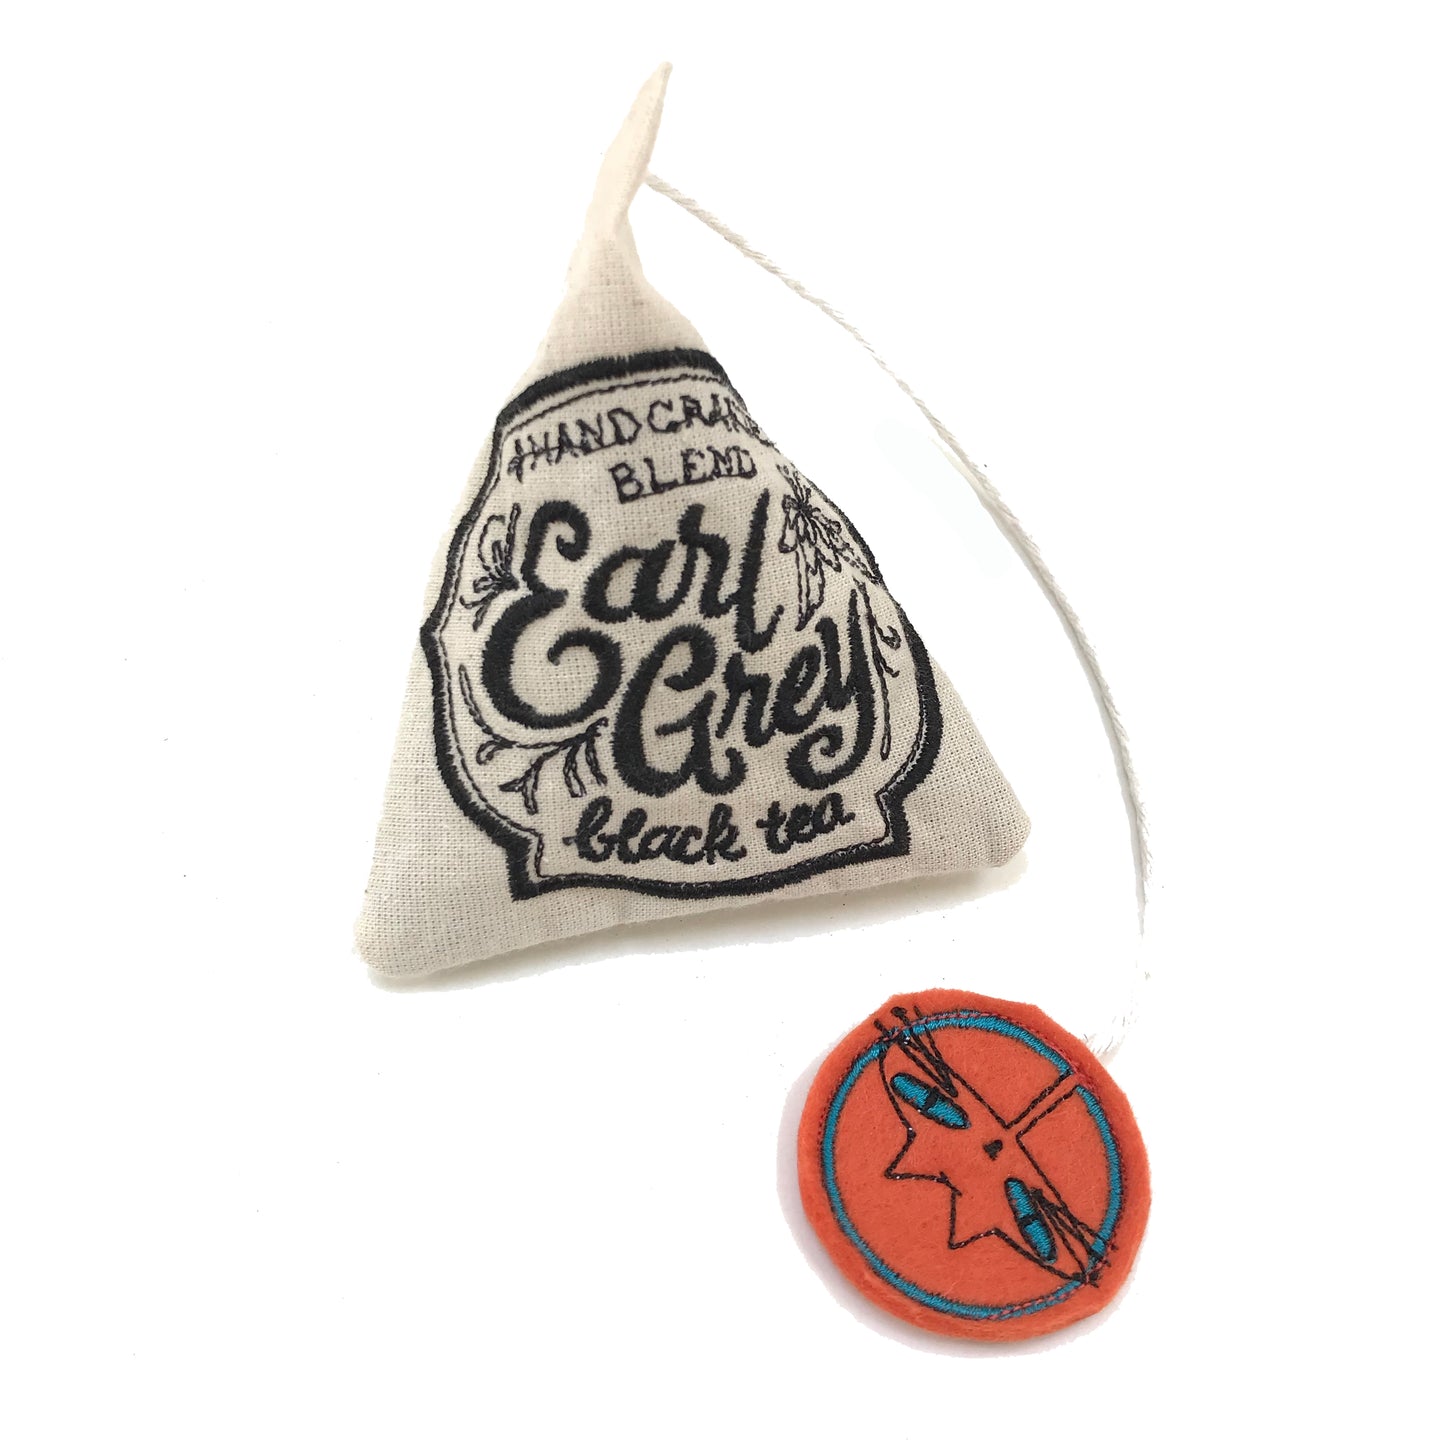 Freak Meowt Luxury Cat Toys, Gifts for Cats Catnip Tea Bag, Best Cat Toys, Handmade in Wales